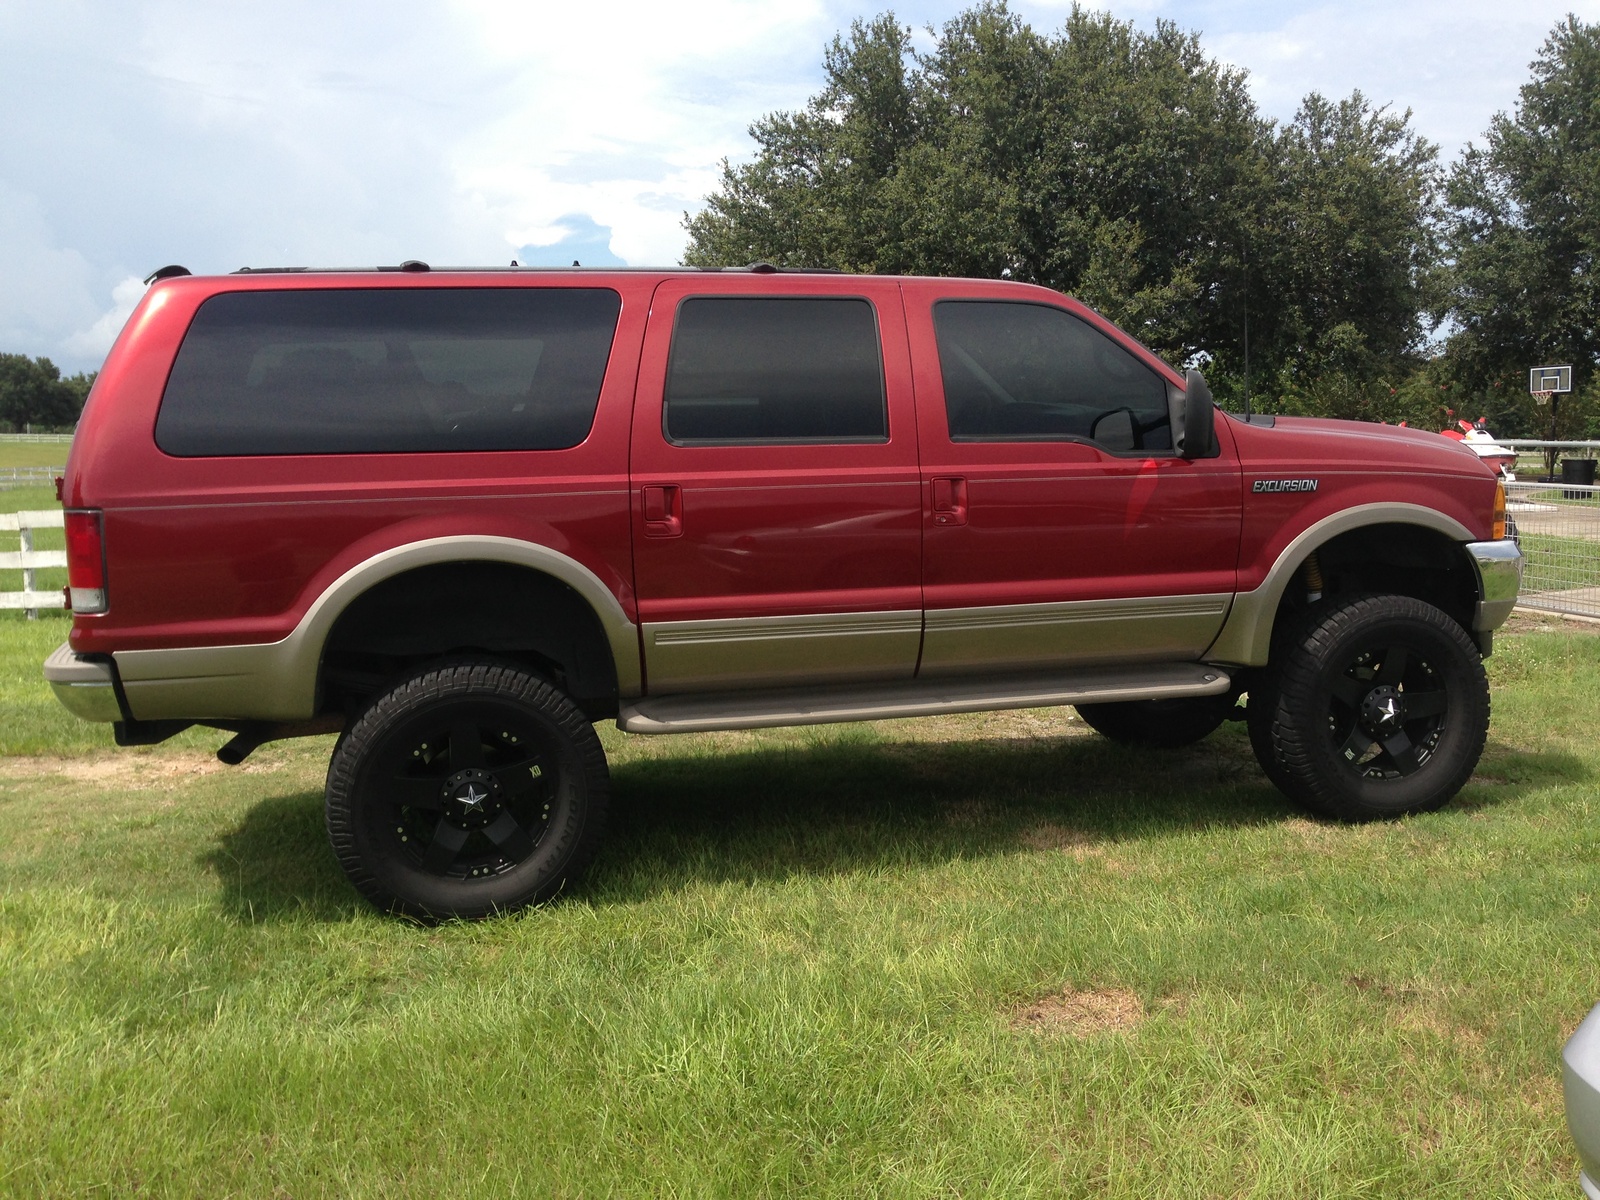 2002 Ford excursion limited reviews #2